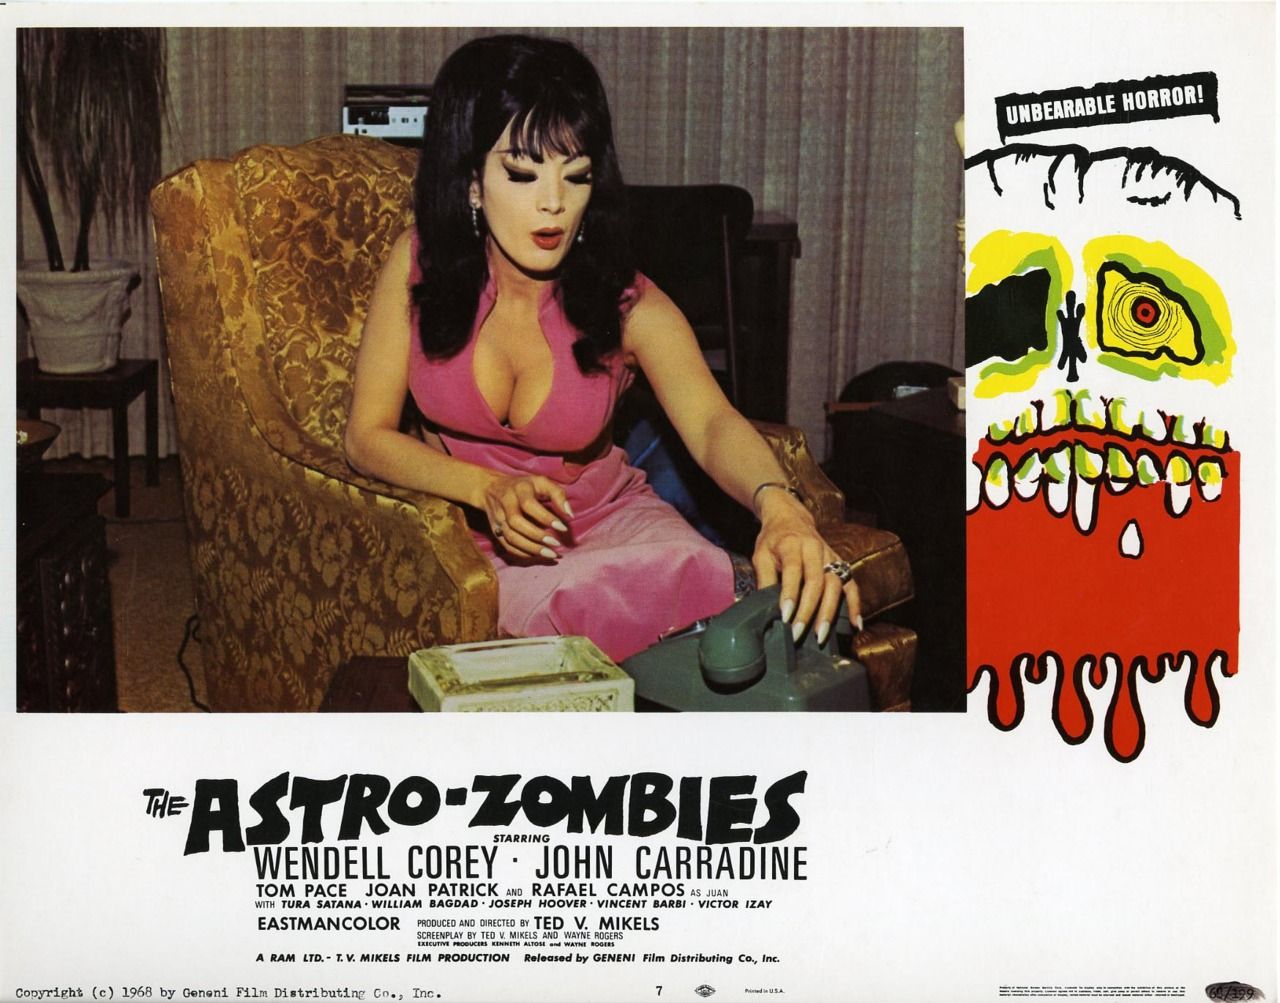 Tura Satana featured on a lobby card for The Astro Zombies (1968)